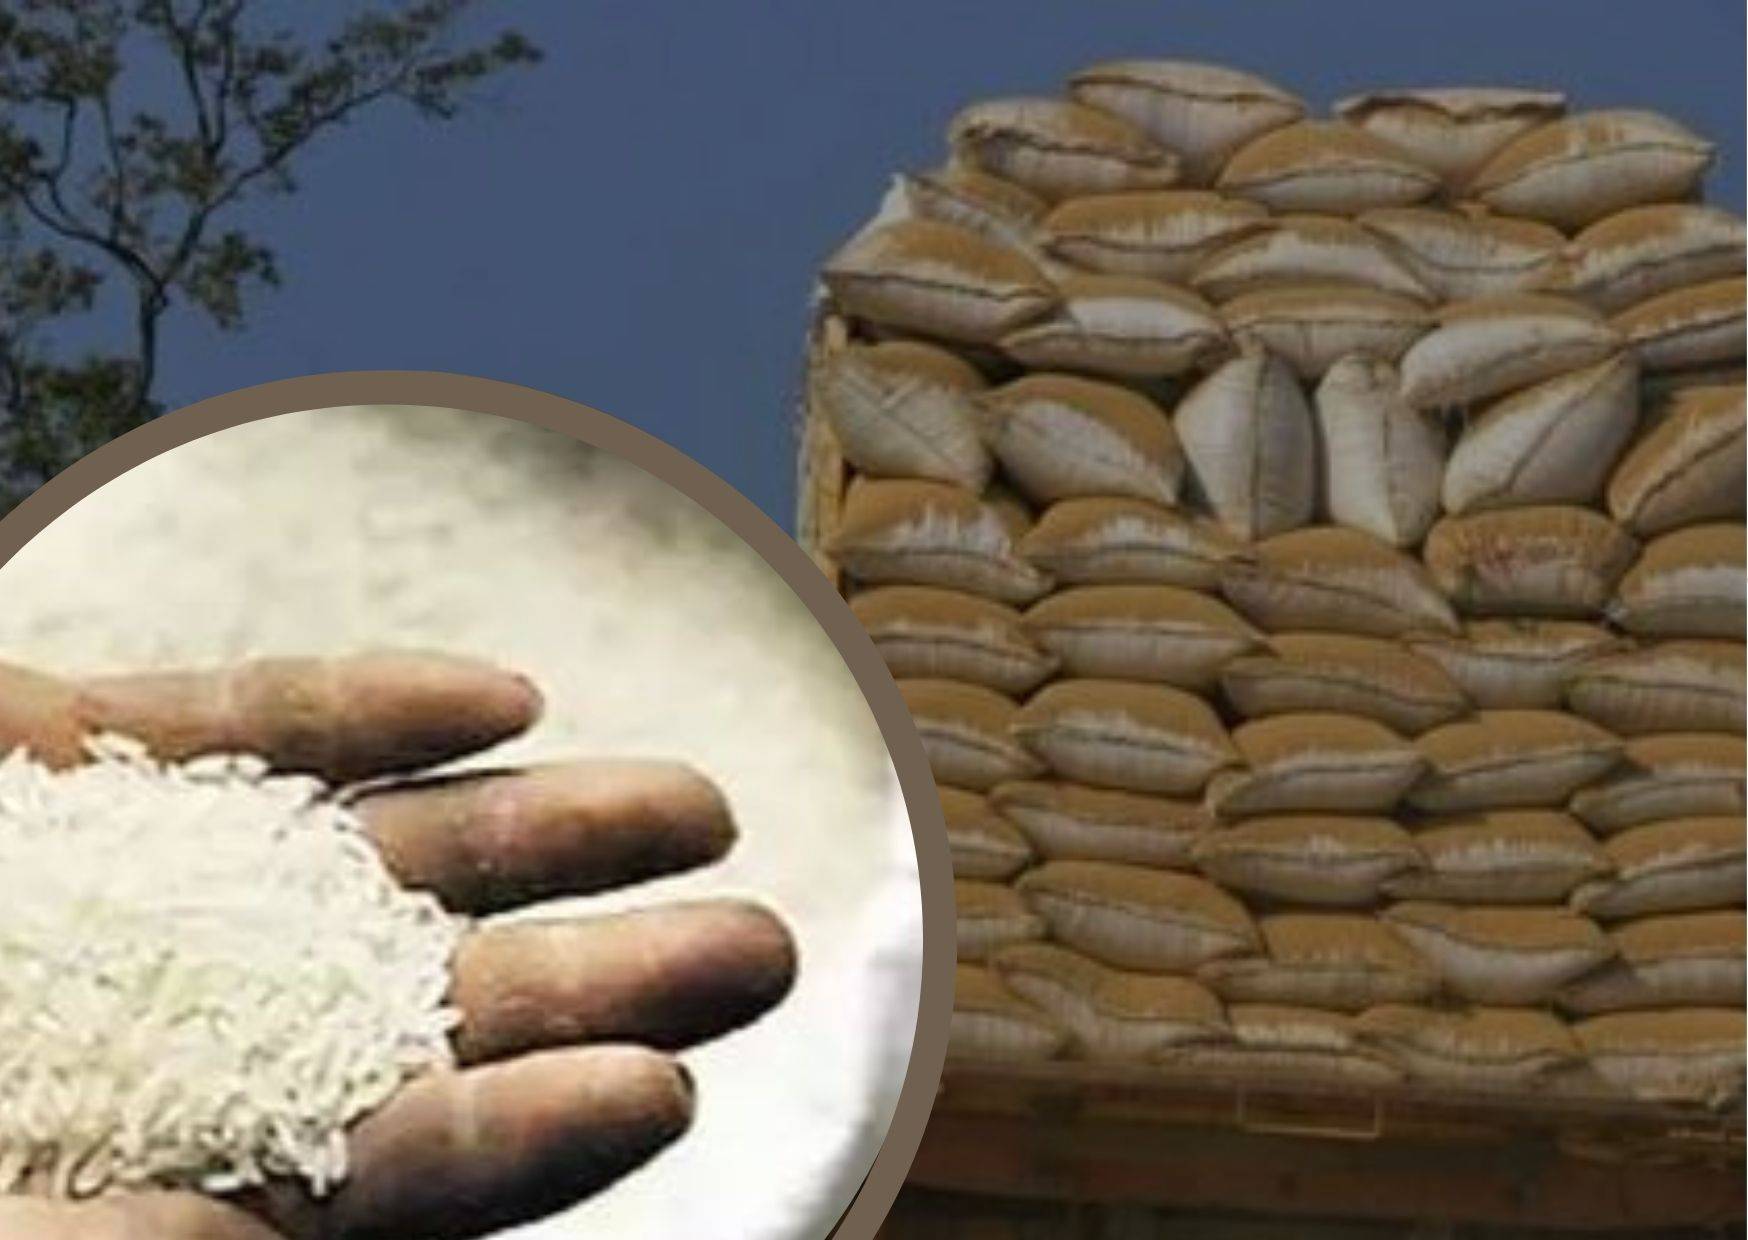 25 quintals of PDS rice seized in Bengaluru